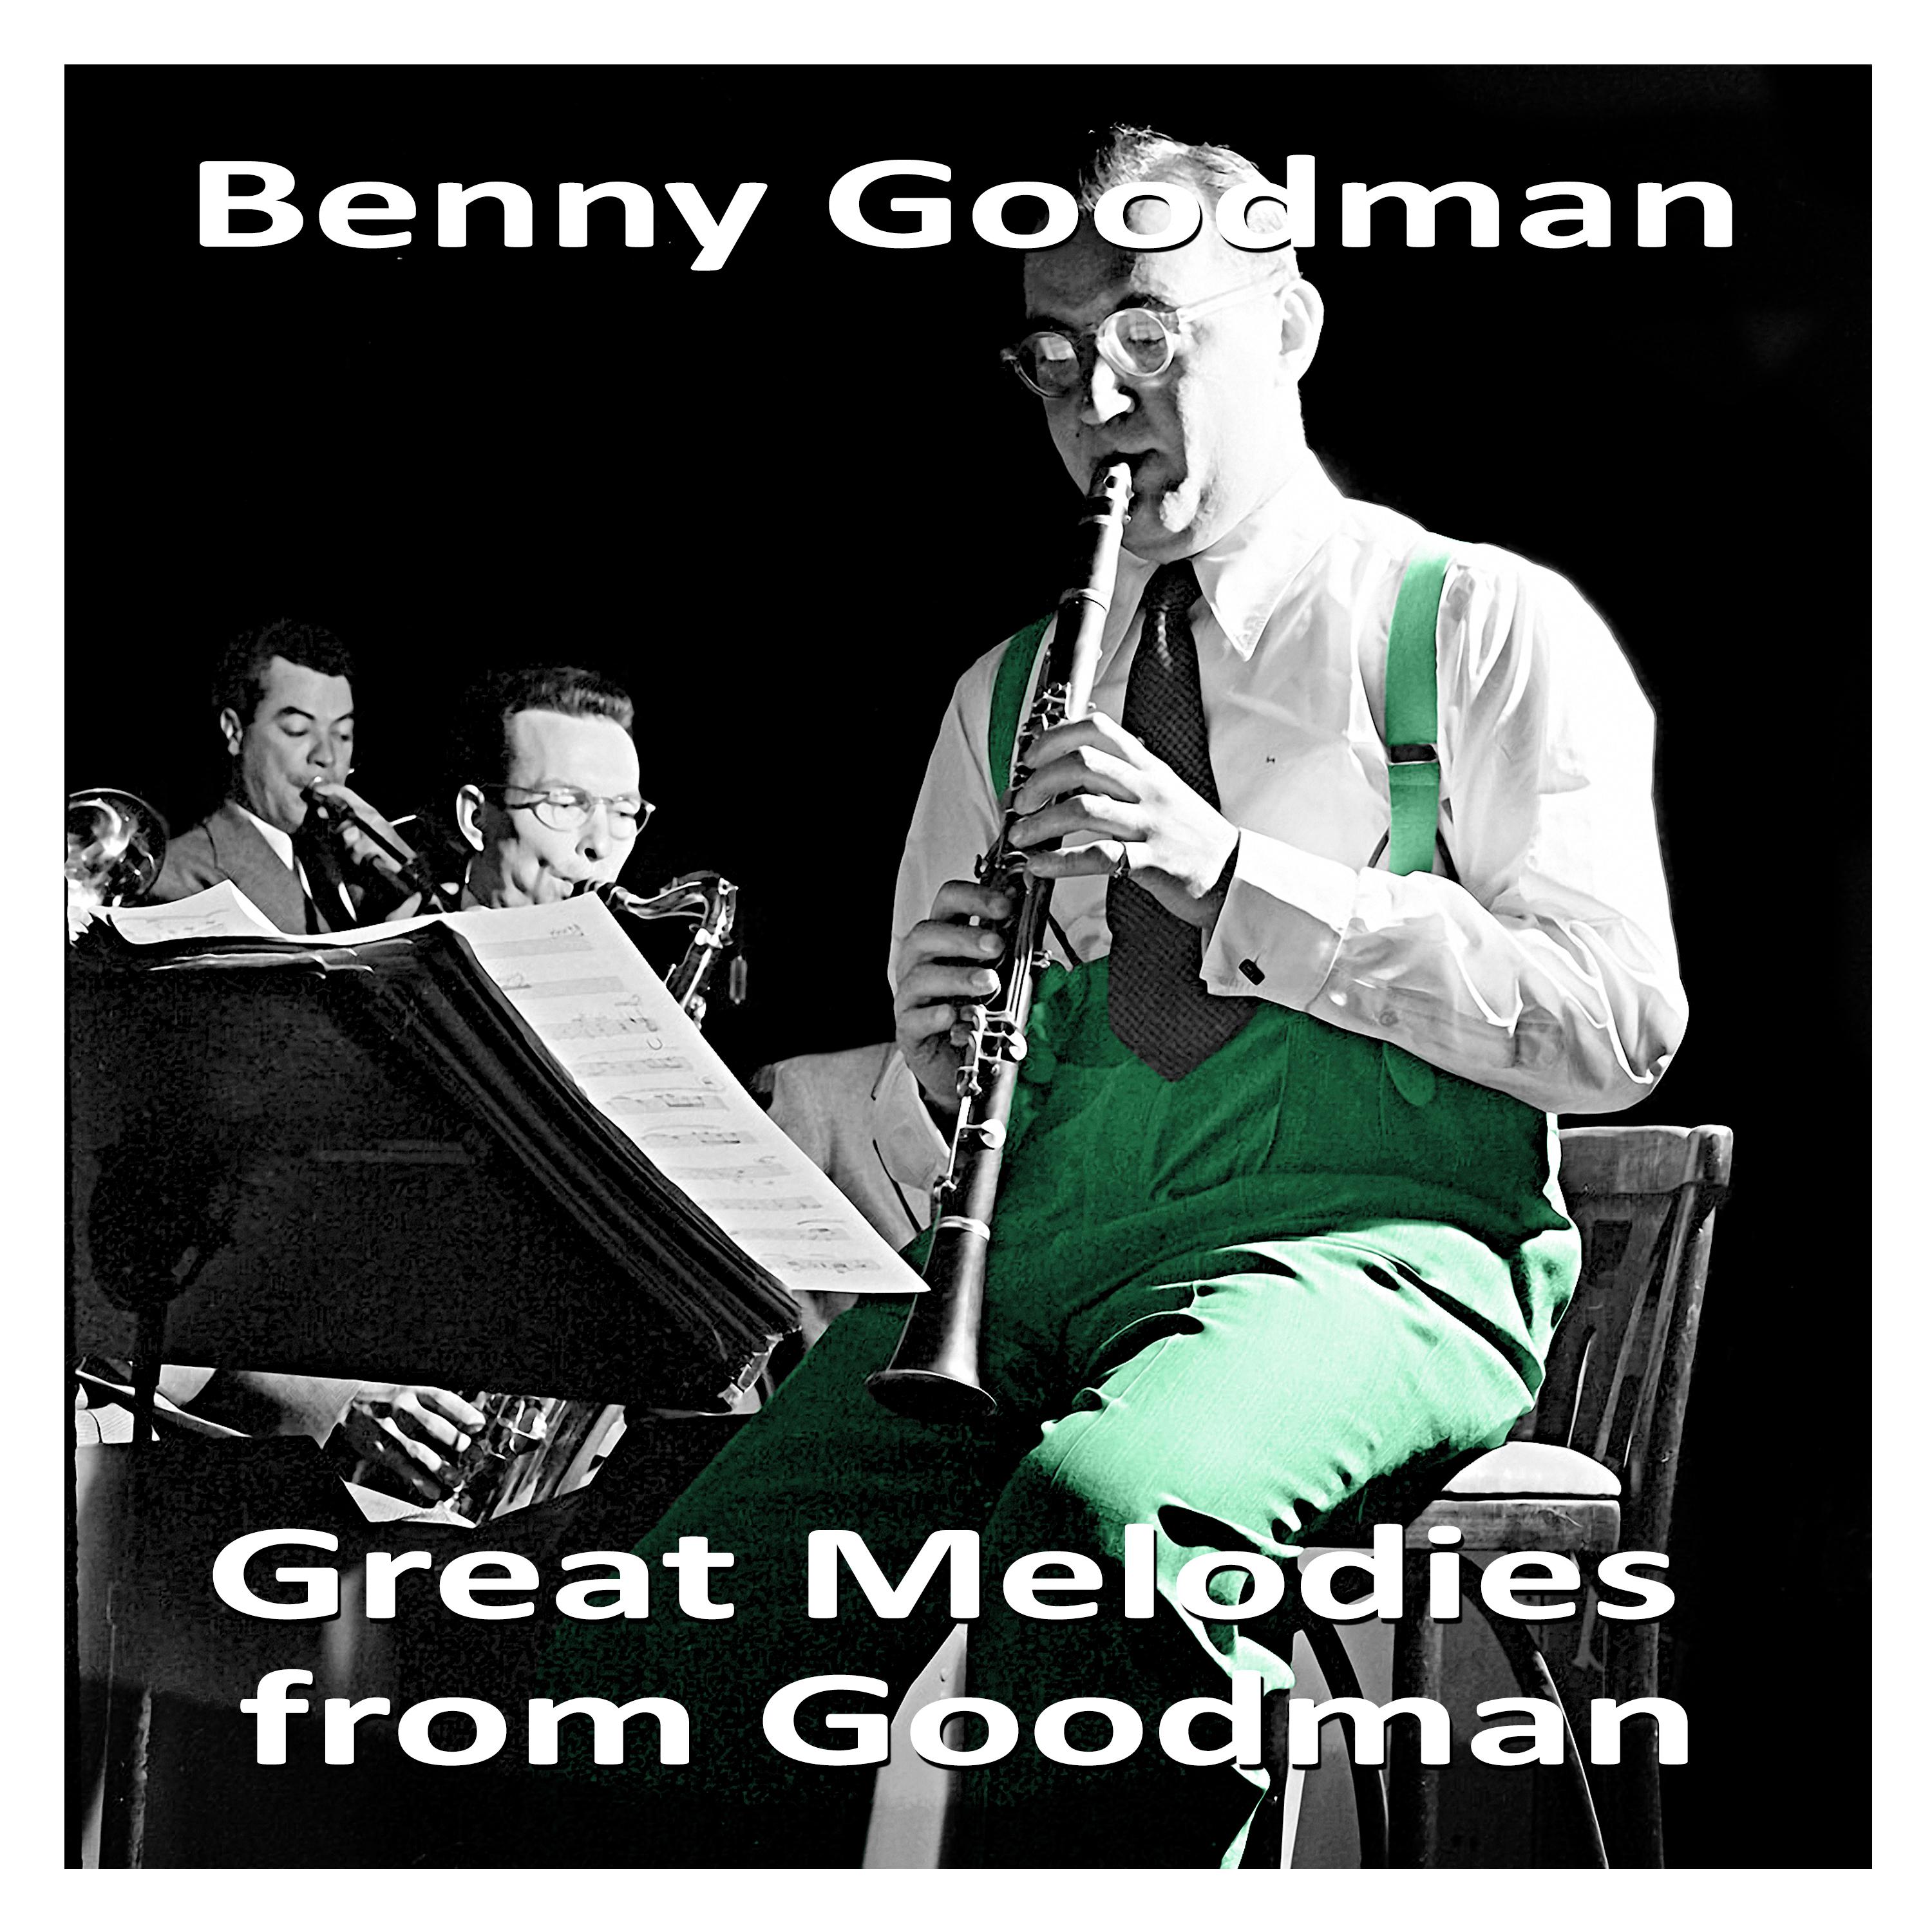 Great Melodies from Goodman